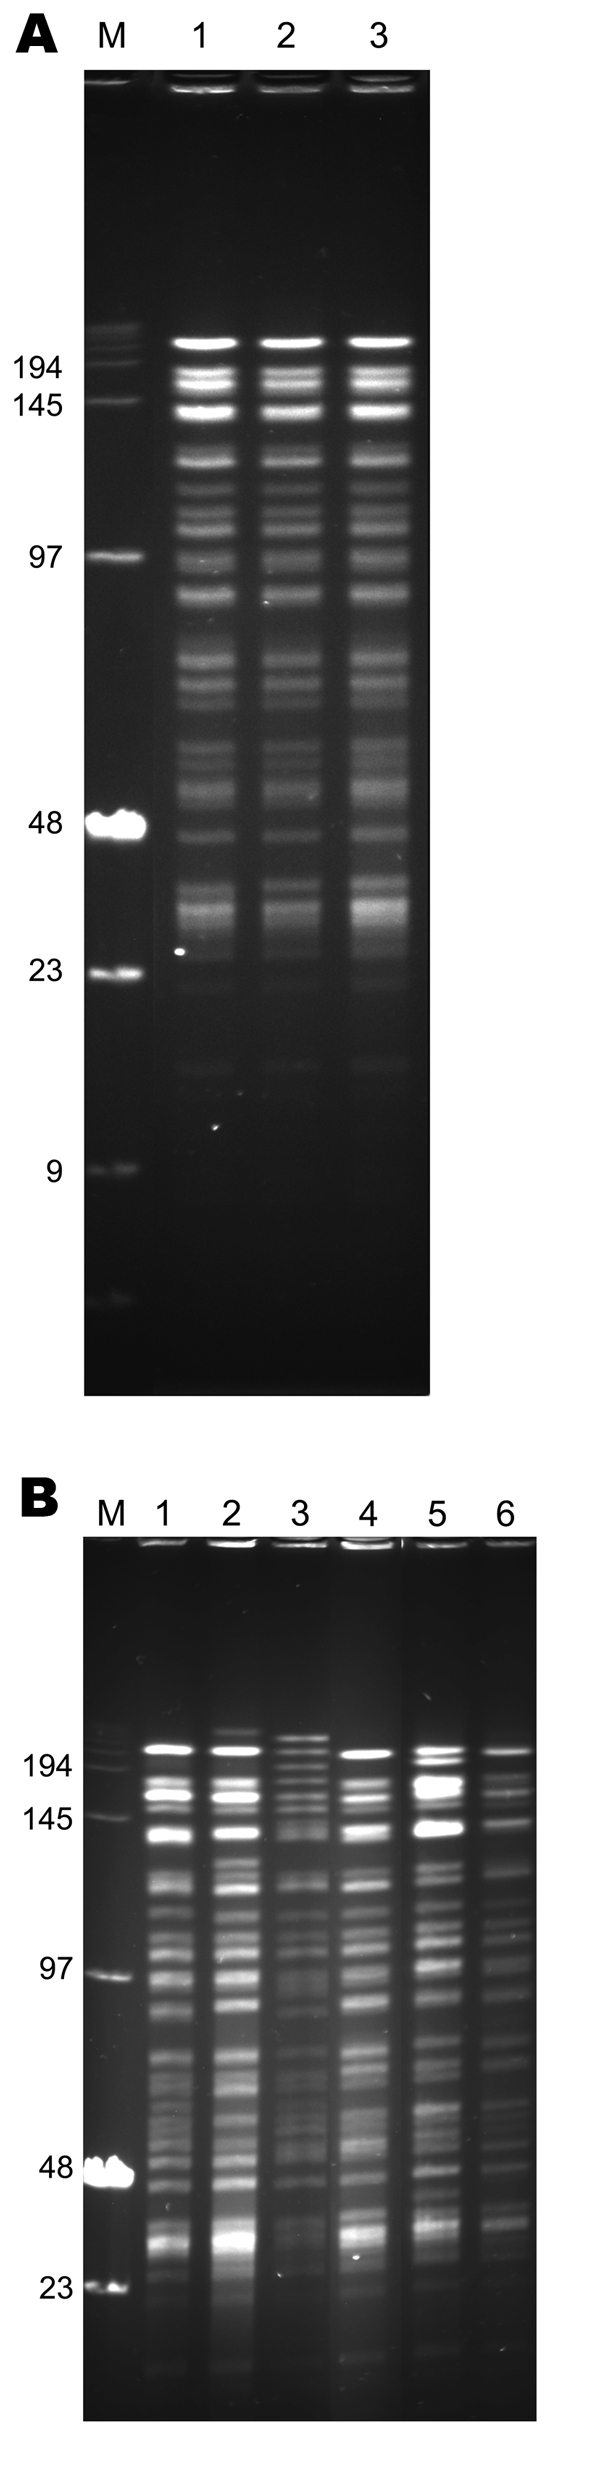 NotI pulsed-field gel electrophoresis patterns of Yersinia pestis strains of biovar Medievalis obtained during plague outbreak in Libya, 2009. A) Pattern of three 2009 isolates from Libya. Lane M, low-range DNA marker (New England Biolabs, Ipswich, MA, USA); lane 1, IP1973; lane 2, IP1974; lane 3, IP1975. B) Comparison of the pattern of 1 isolate from Libya with those of other biovar Medievalis strains. Lane M, low-range DNA marker (New England Biolabs); lane 1, IP516 (Kurdistan); lane 2, IP519 